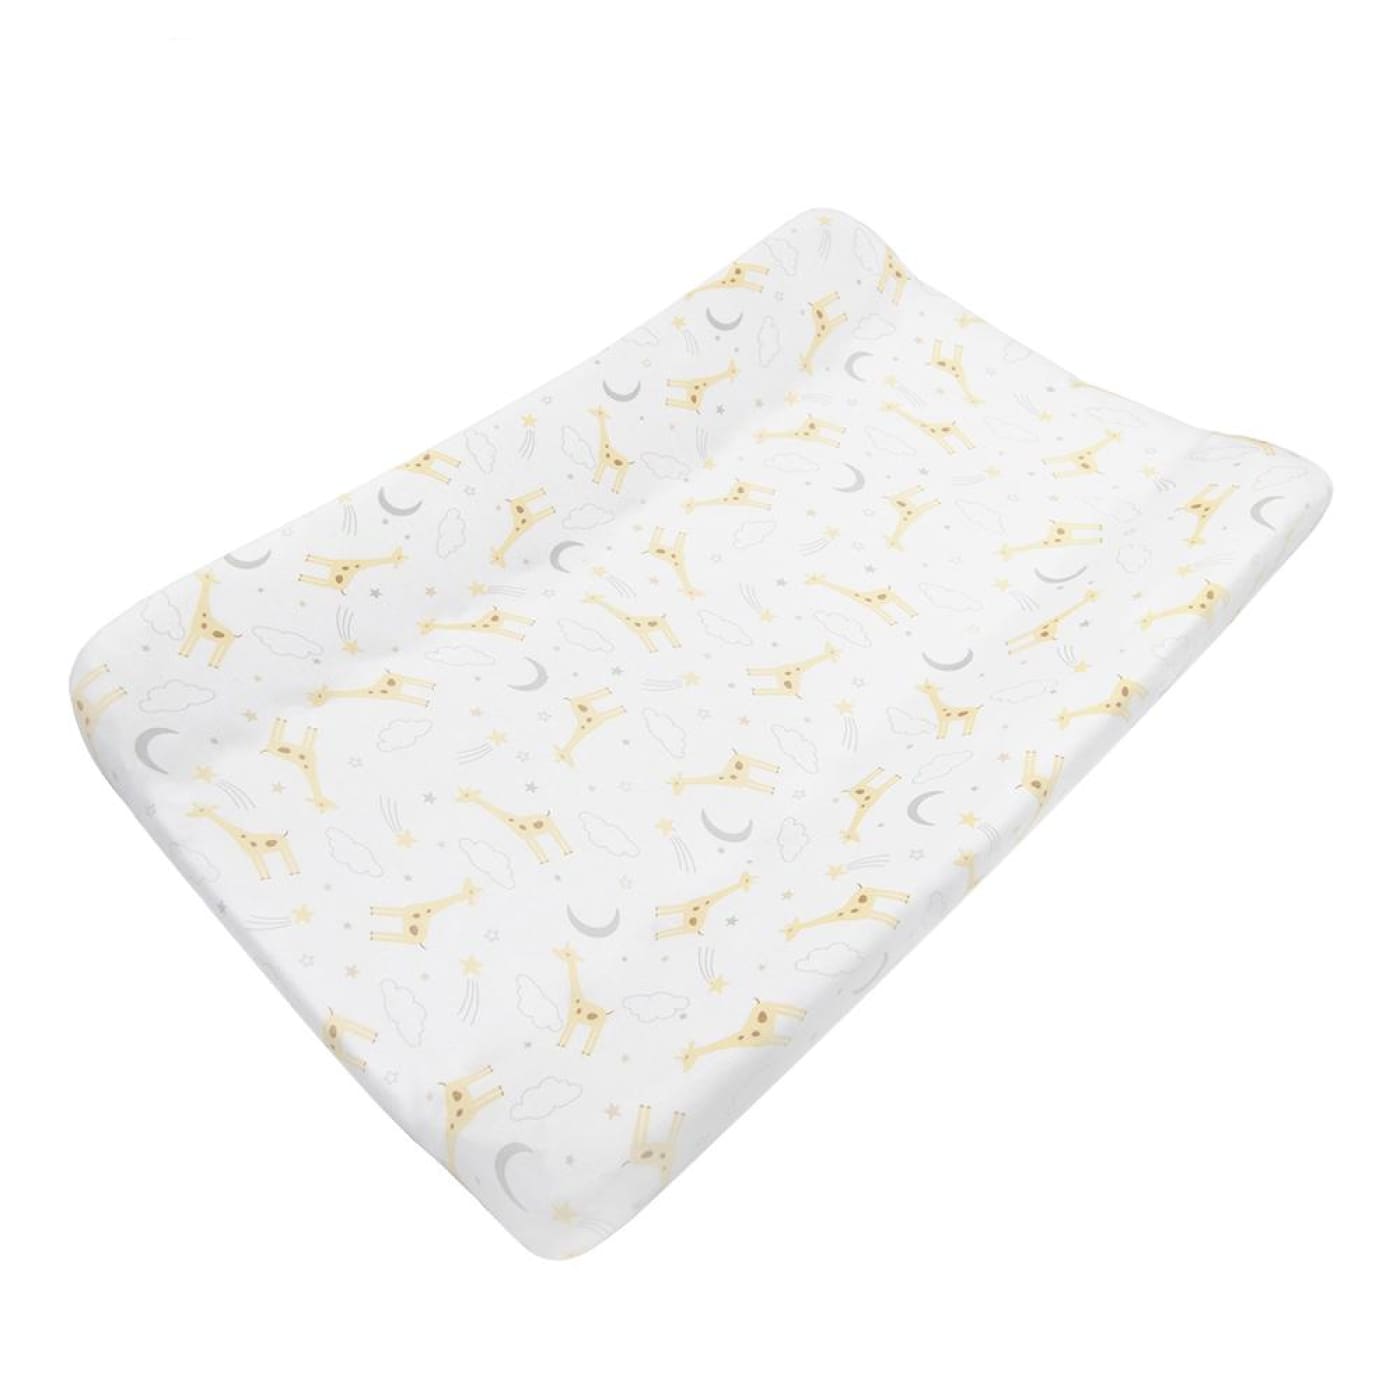 Living Textiles Jersey Change Pad Cover & Liner - Noah Giraffe - Noah Giraffe - BATHTIME & CHANGING - CHANGE MATS/COVERS